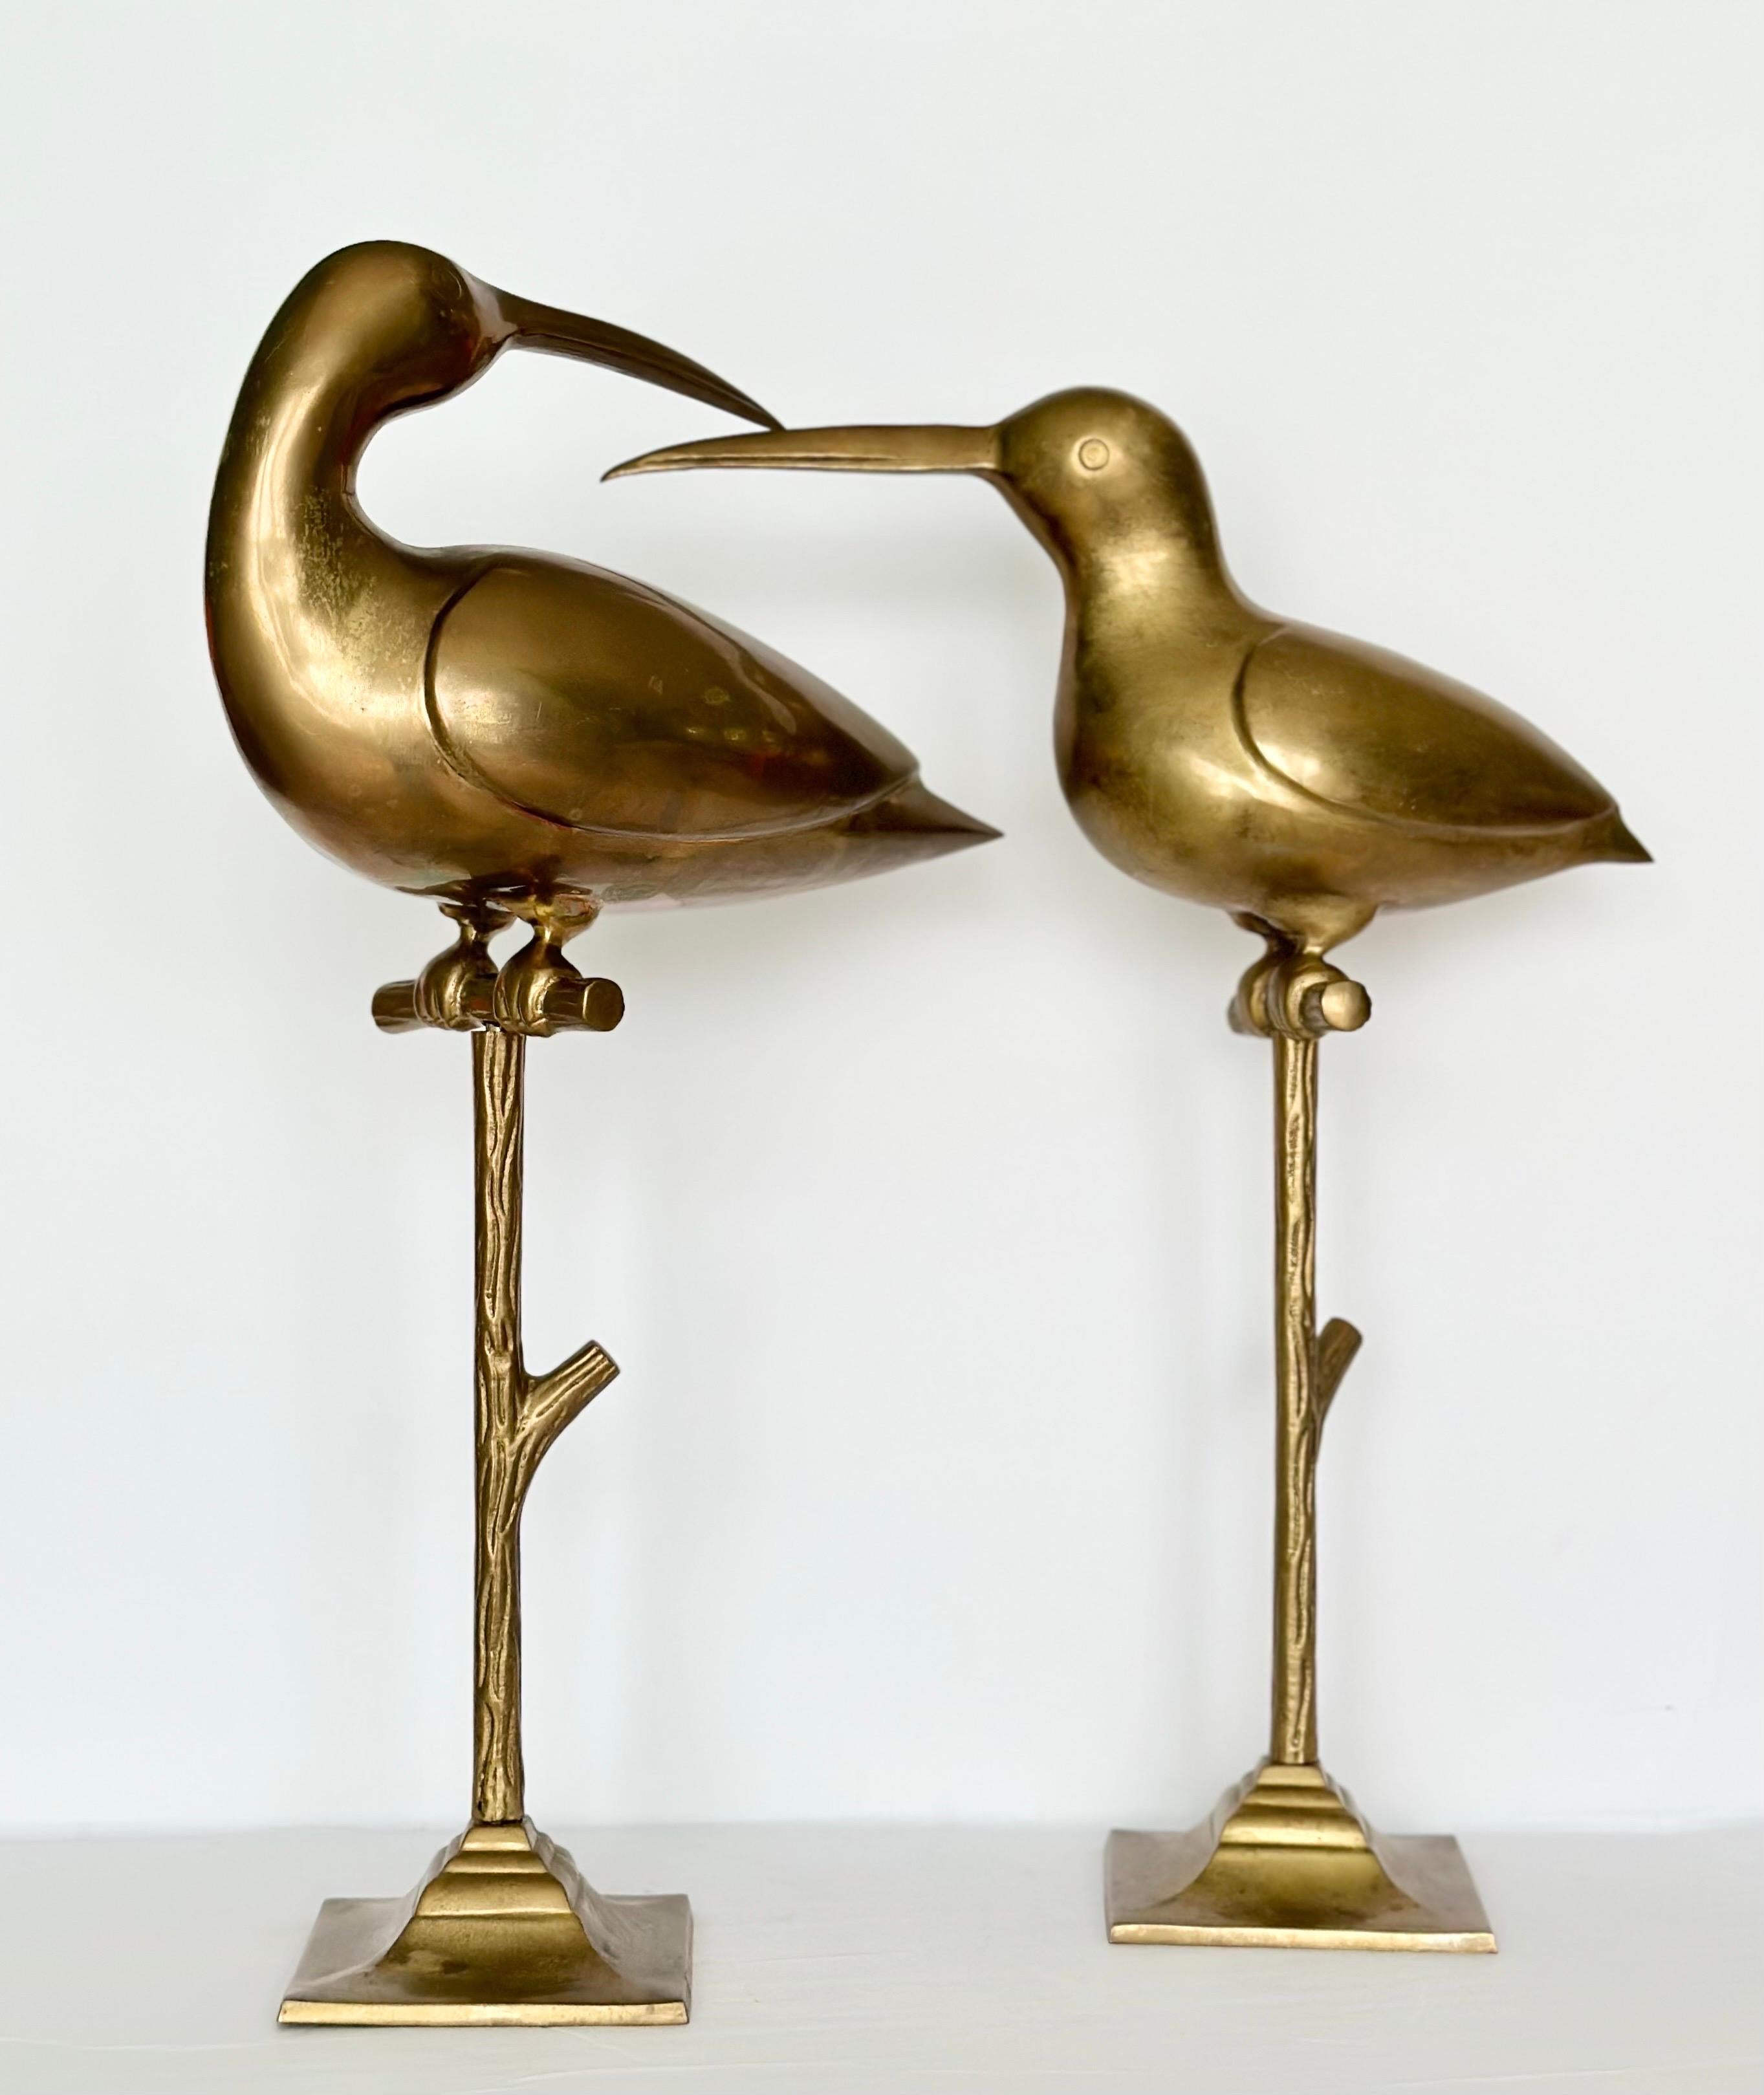 We are very pleased to offer a stunning pair of vintage figurine birds, circa the 1960s.  This captivating pair of vintage brass bird sculptures portray a graceful curlew perched upon a sturdy branch. The brass material adds a touch of timeless